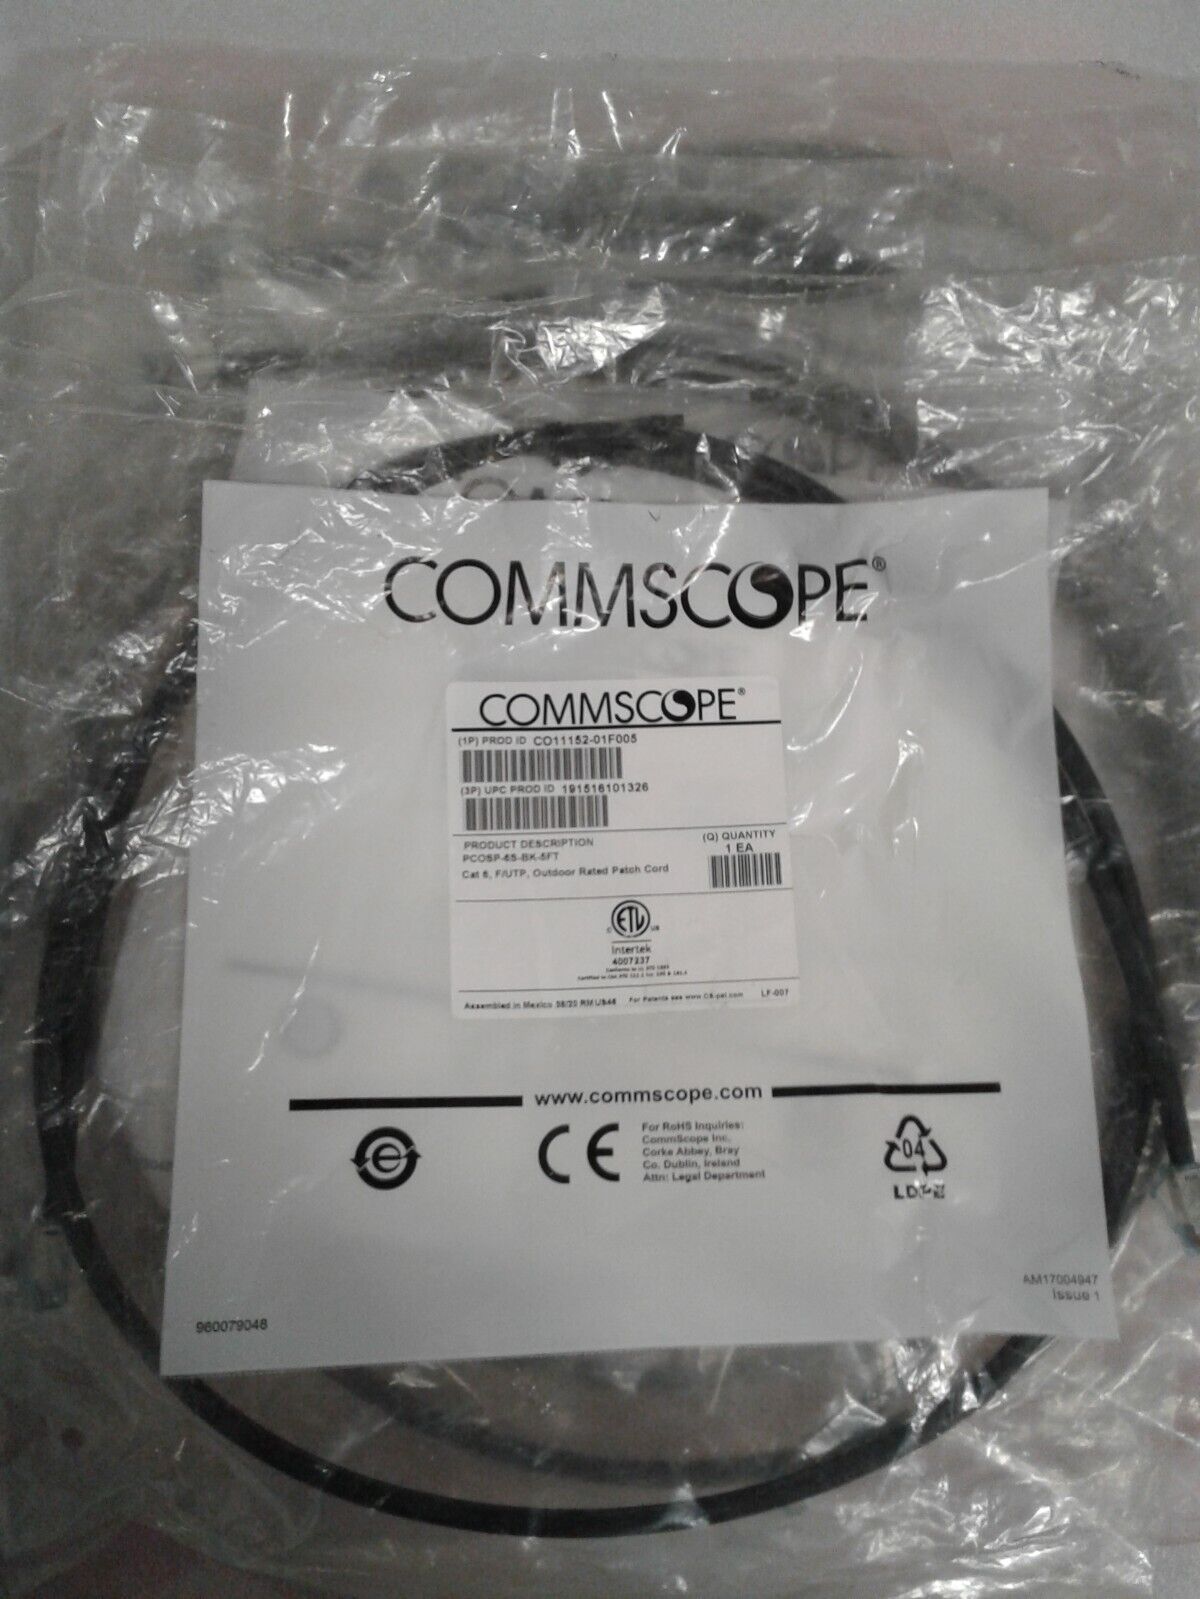 Qty 5 - CommScope PCOSP-6S-BK-5FT CO11152-01F005 Outdoor Patch Cable - Lot of 5